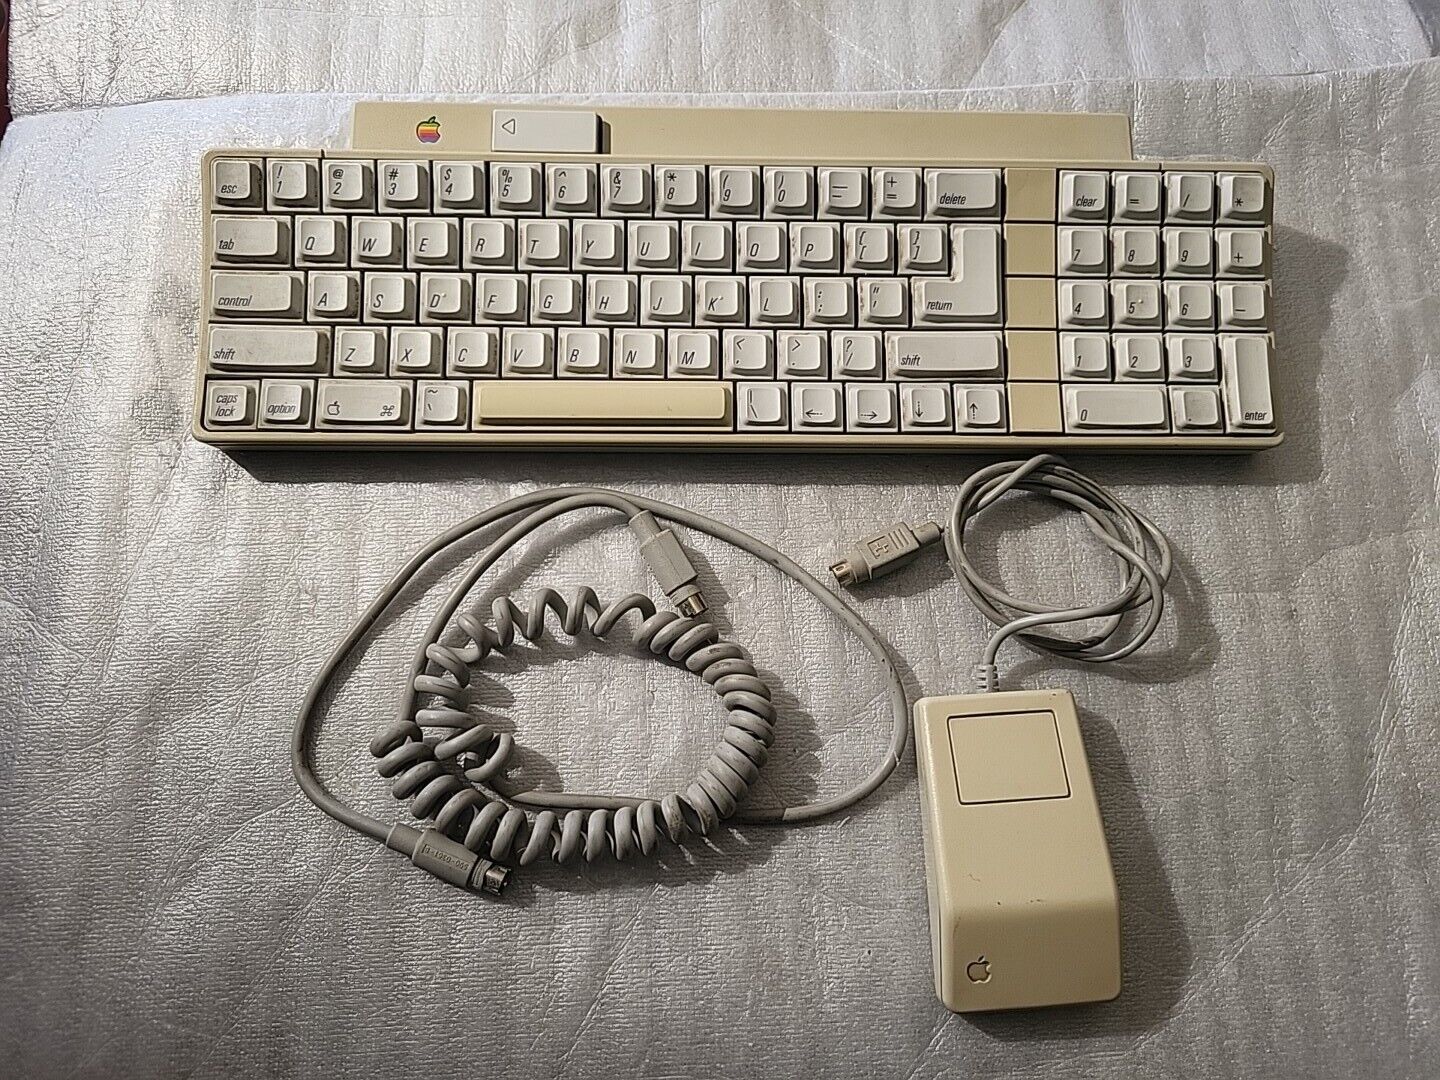 Vintage Apple Keyboard 658-4081 W/Mouse. Free Fast Shipping 